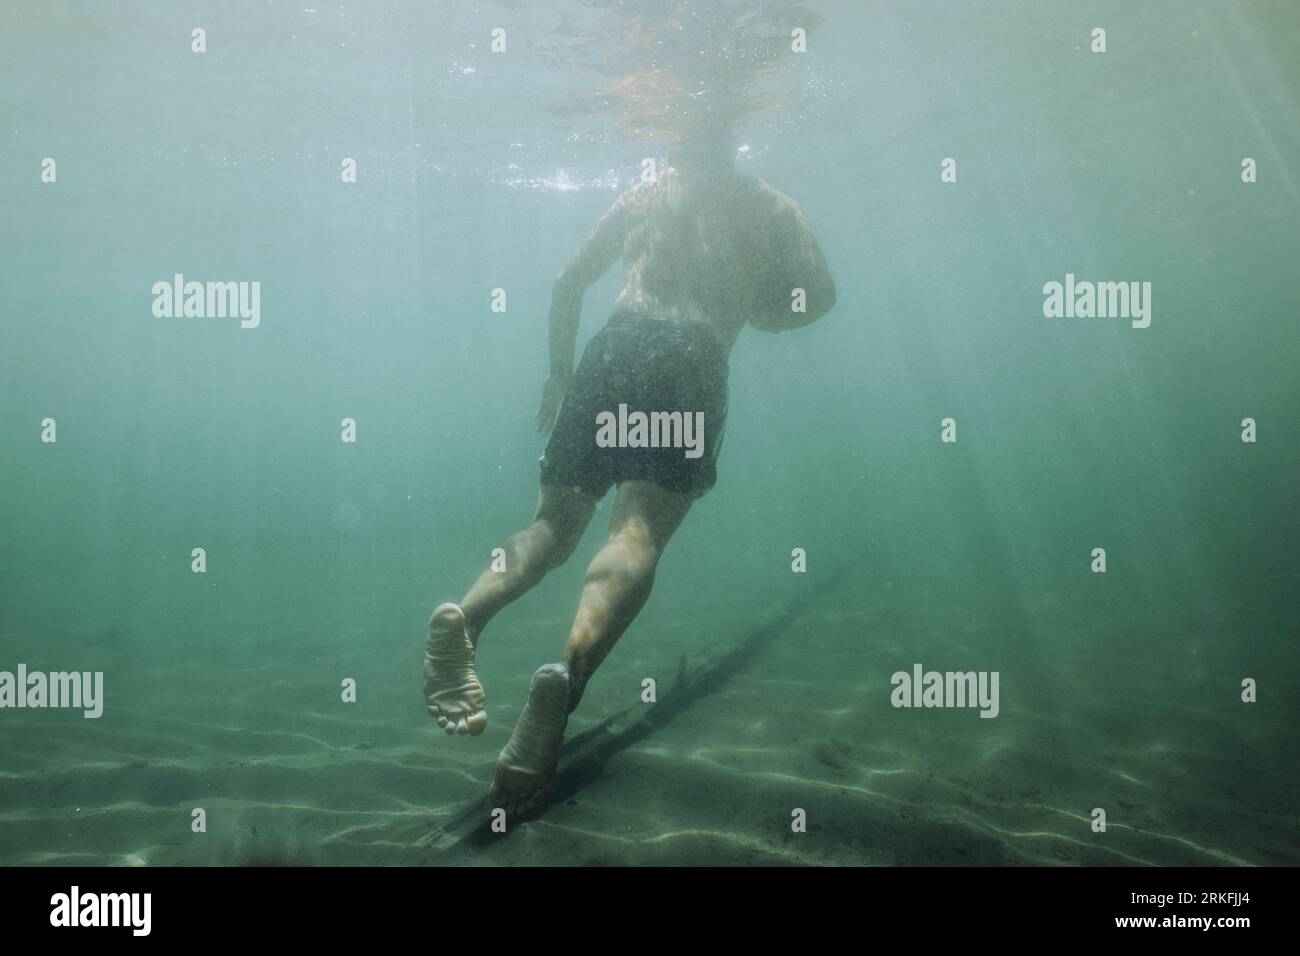 A young male floats freely underwater in a lake. Stock Photo